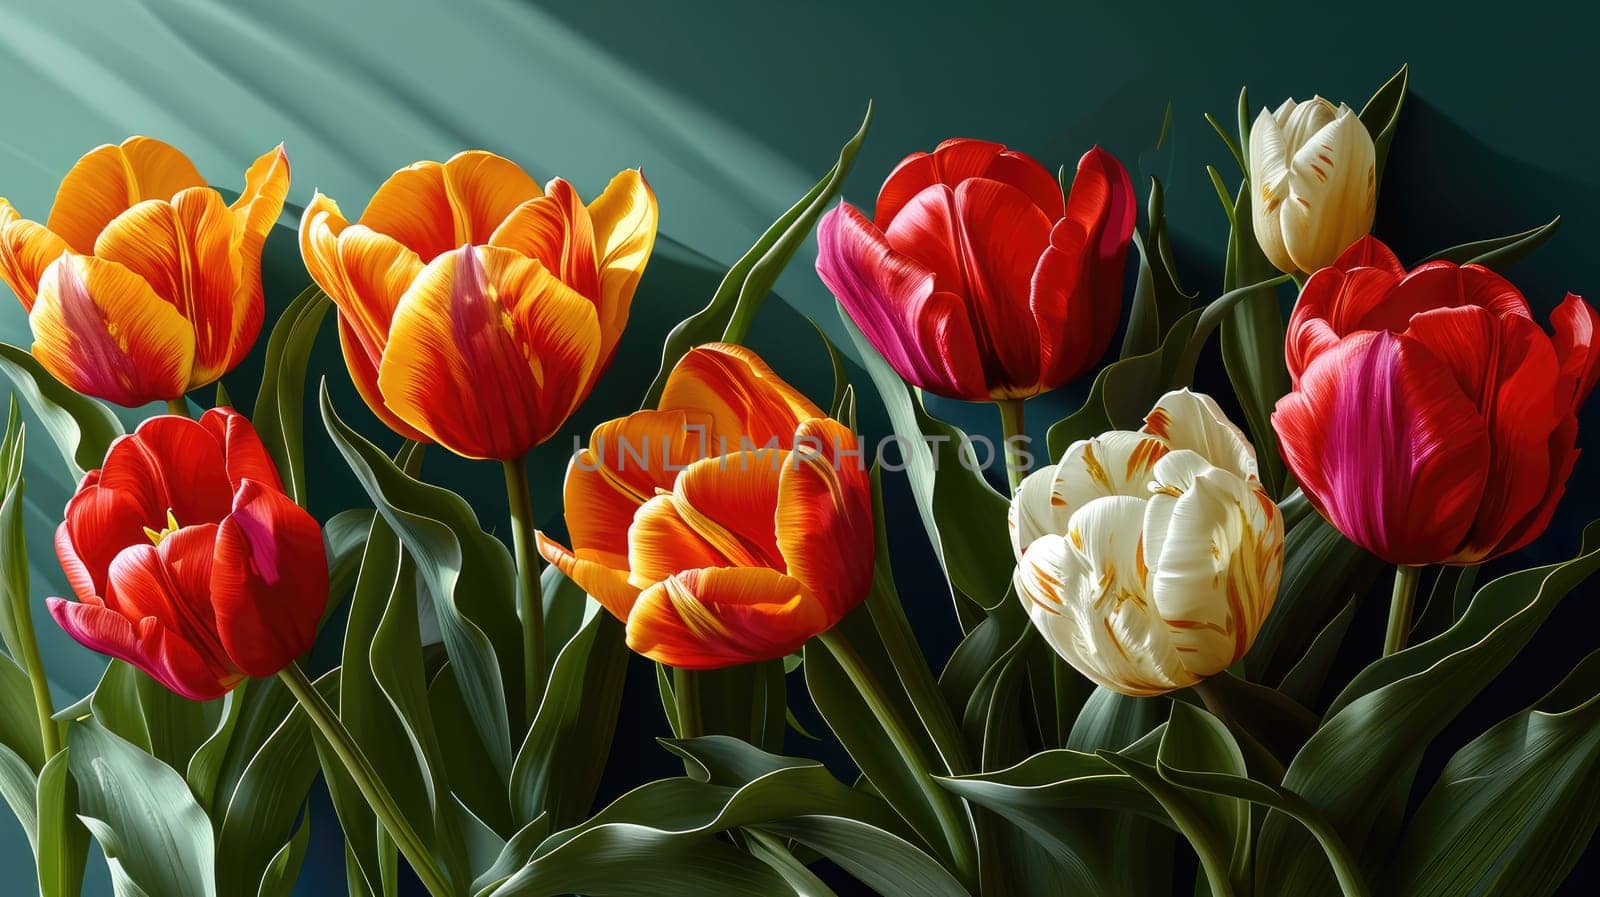 Colorful tulips create rainbow inspiration against a light background of spring tenderness by Yurich32